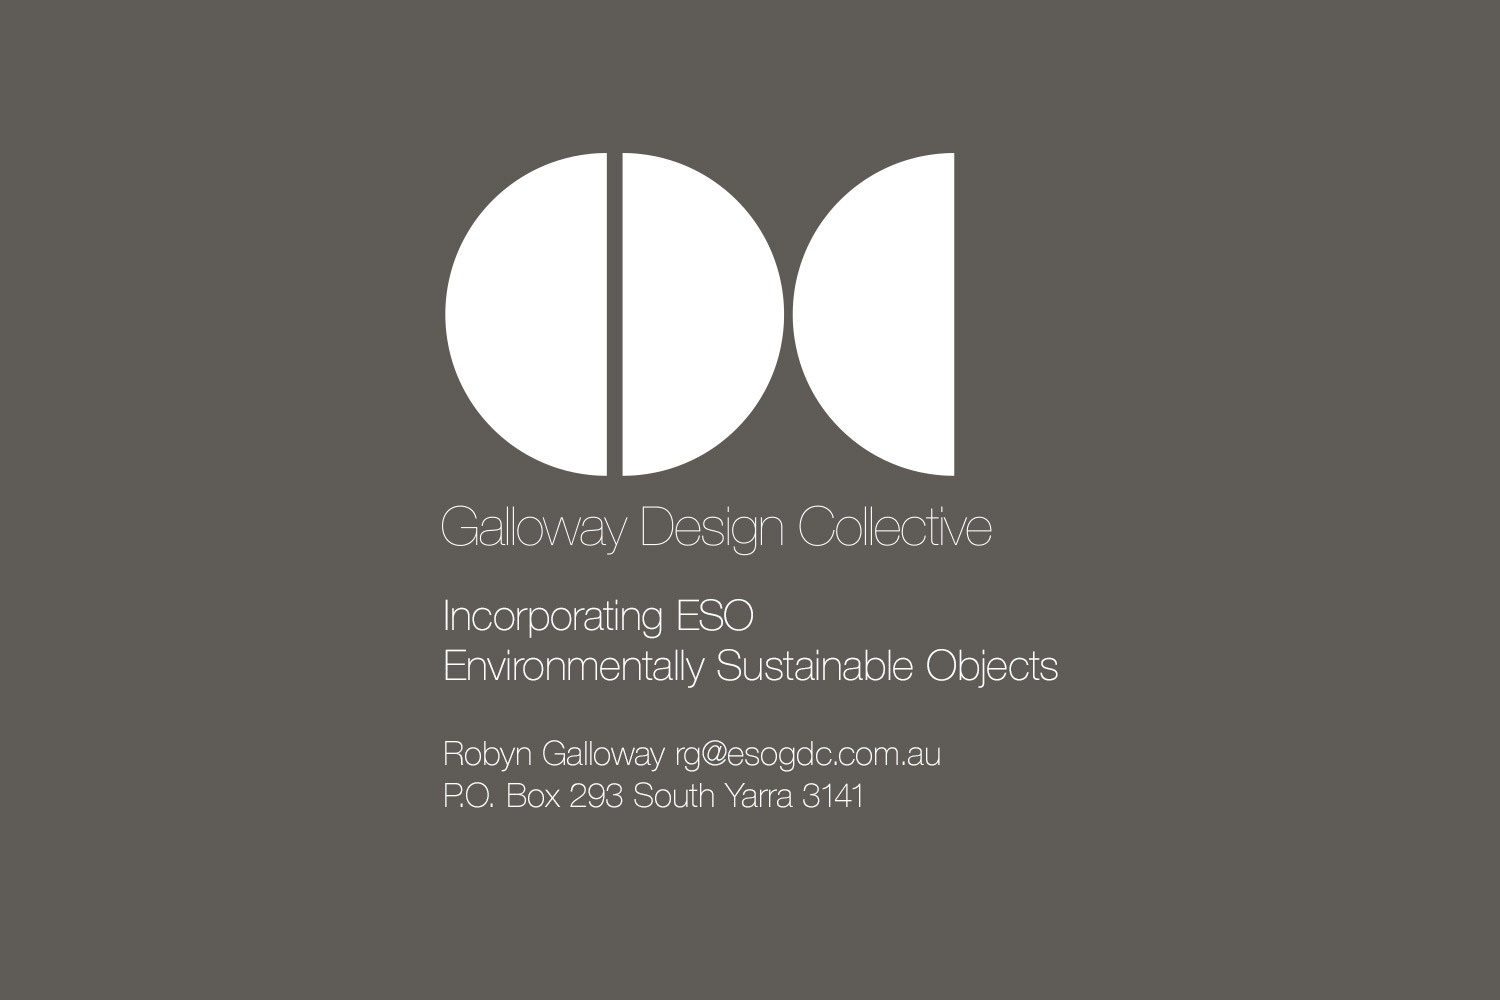 Galloway Design Collective. Incorporating ESO, Environmantally Sustainable Objects. Robyn Galloway.